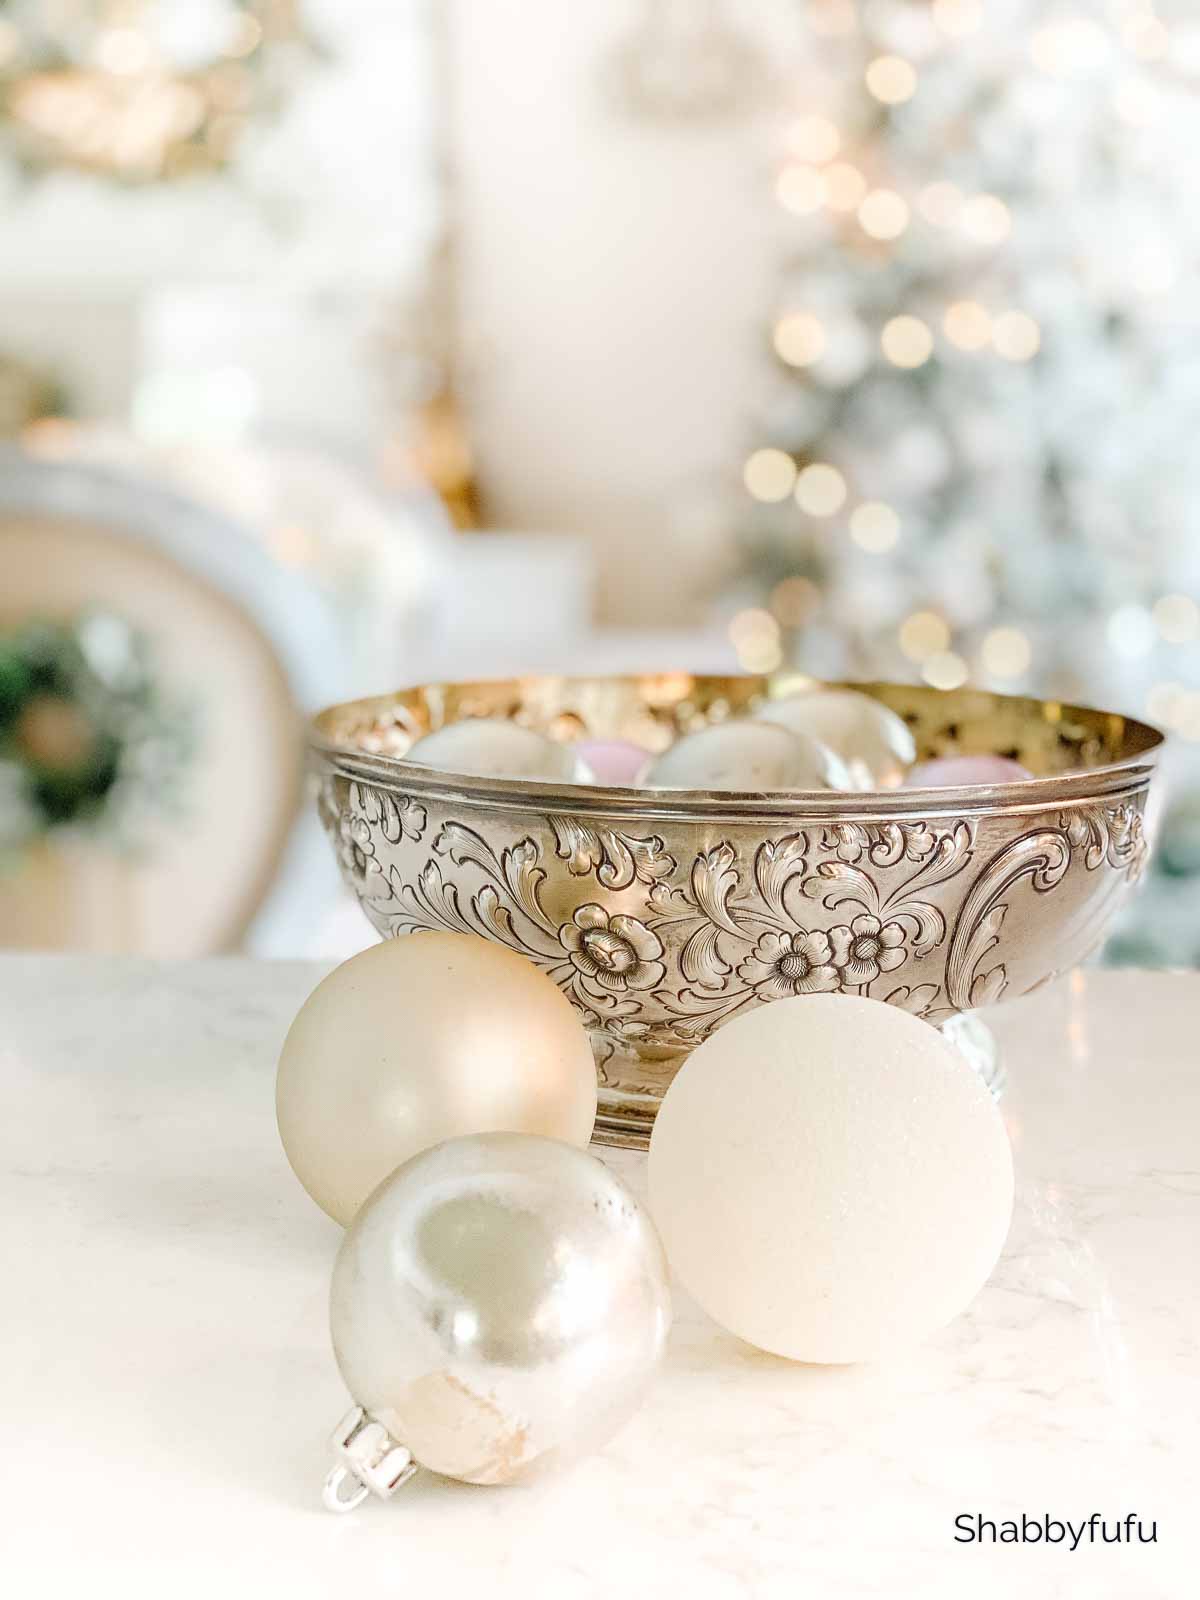 How To Make New Christmas Ornaments Look Vintage